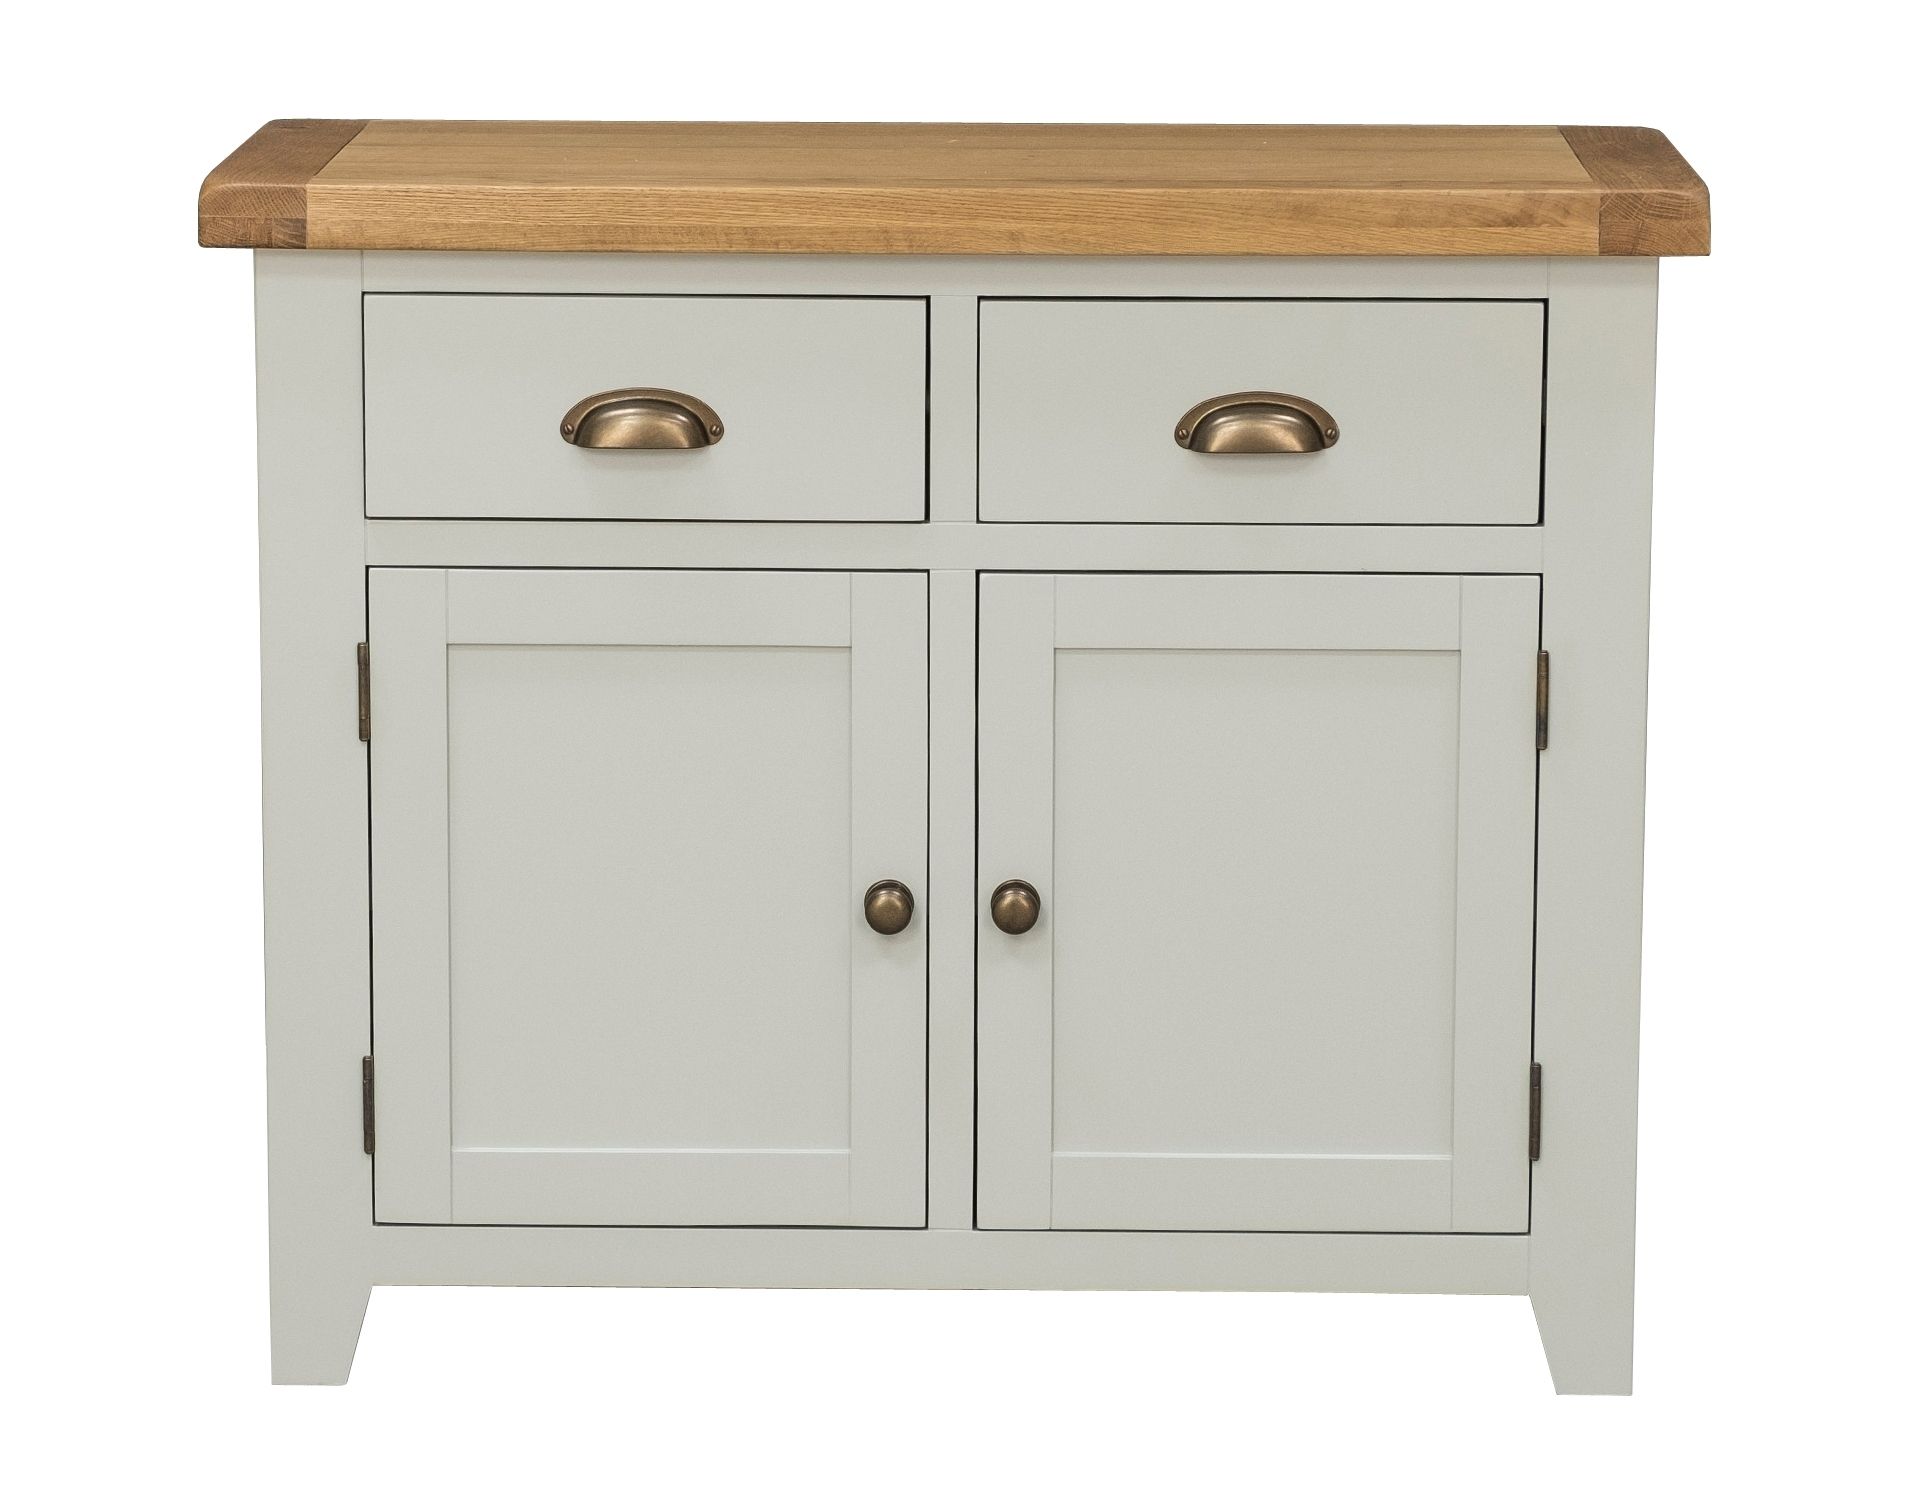 Sideboard 2 Door 2 Drawer – Grey Painted – Sideboards – Furniture World Within Most Current Tobias 4 Door Sideboards (View 12 of 20)